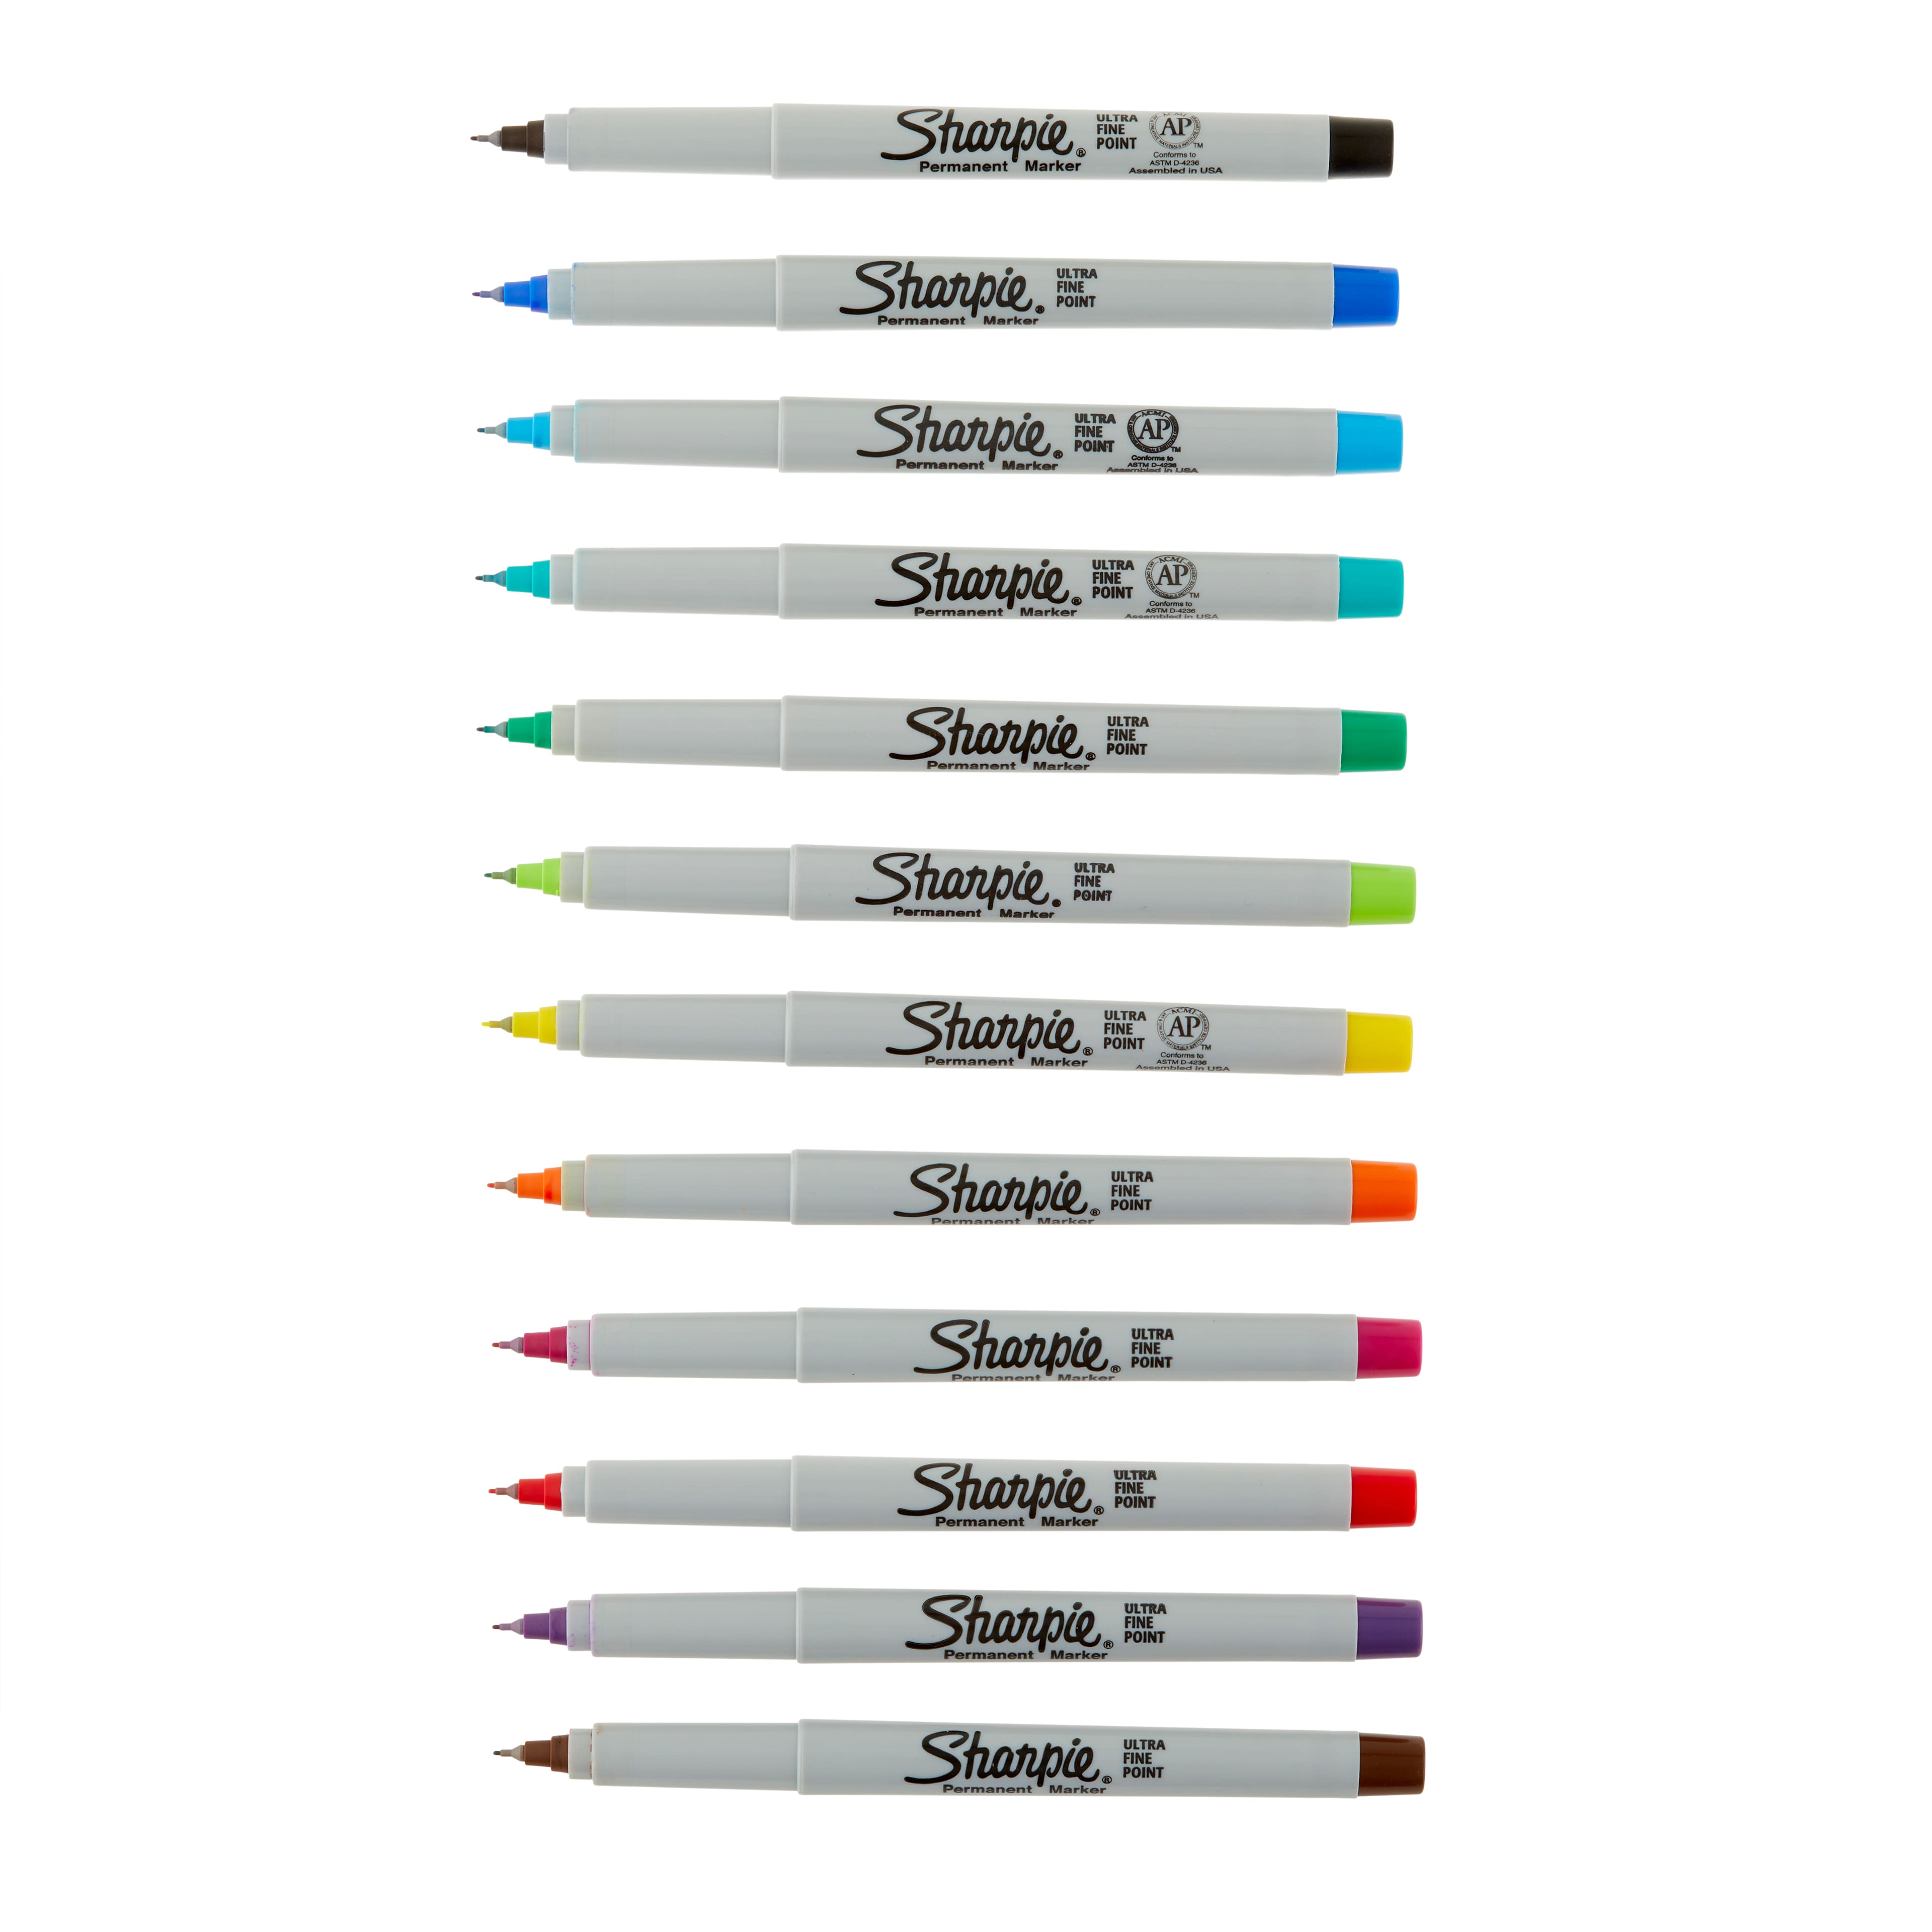 Sharpie Permanent Markers, Brush Tip, Assorted, 12 Pack